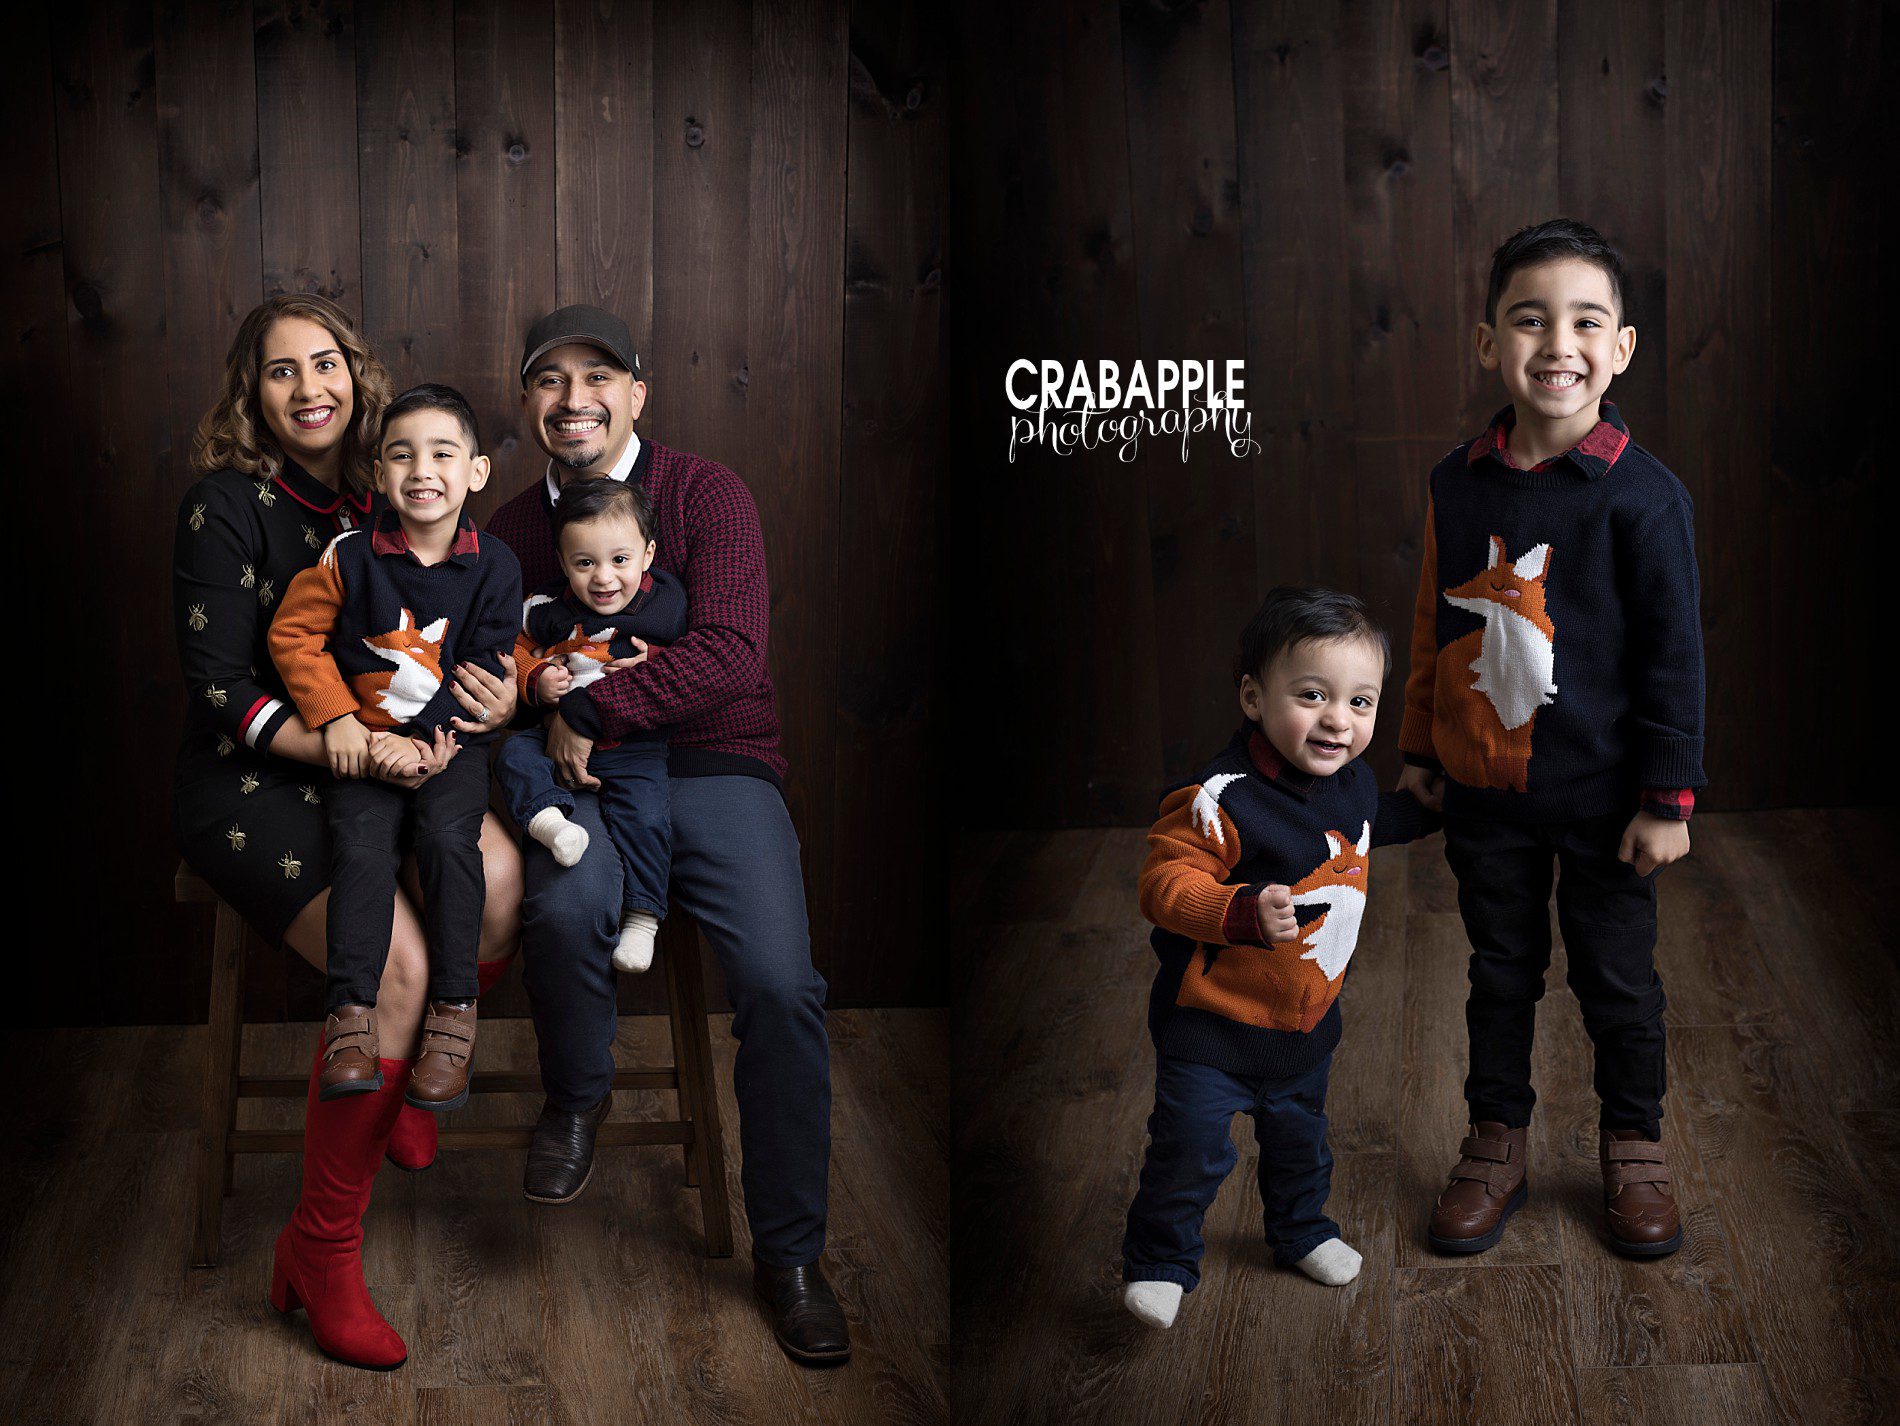 Styling and posing ideas for family and child portraits